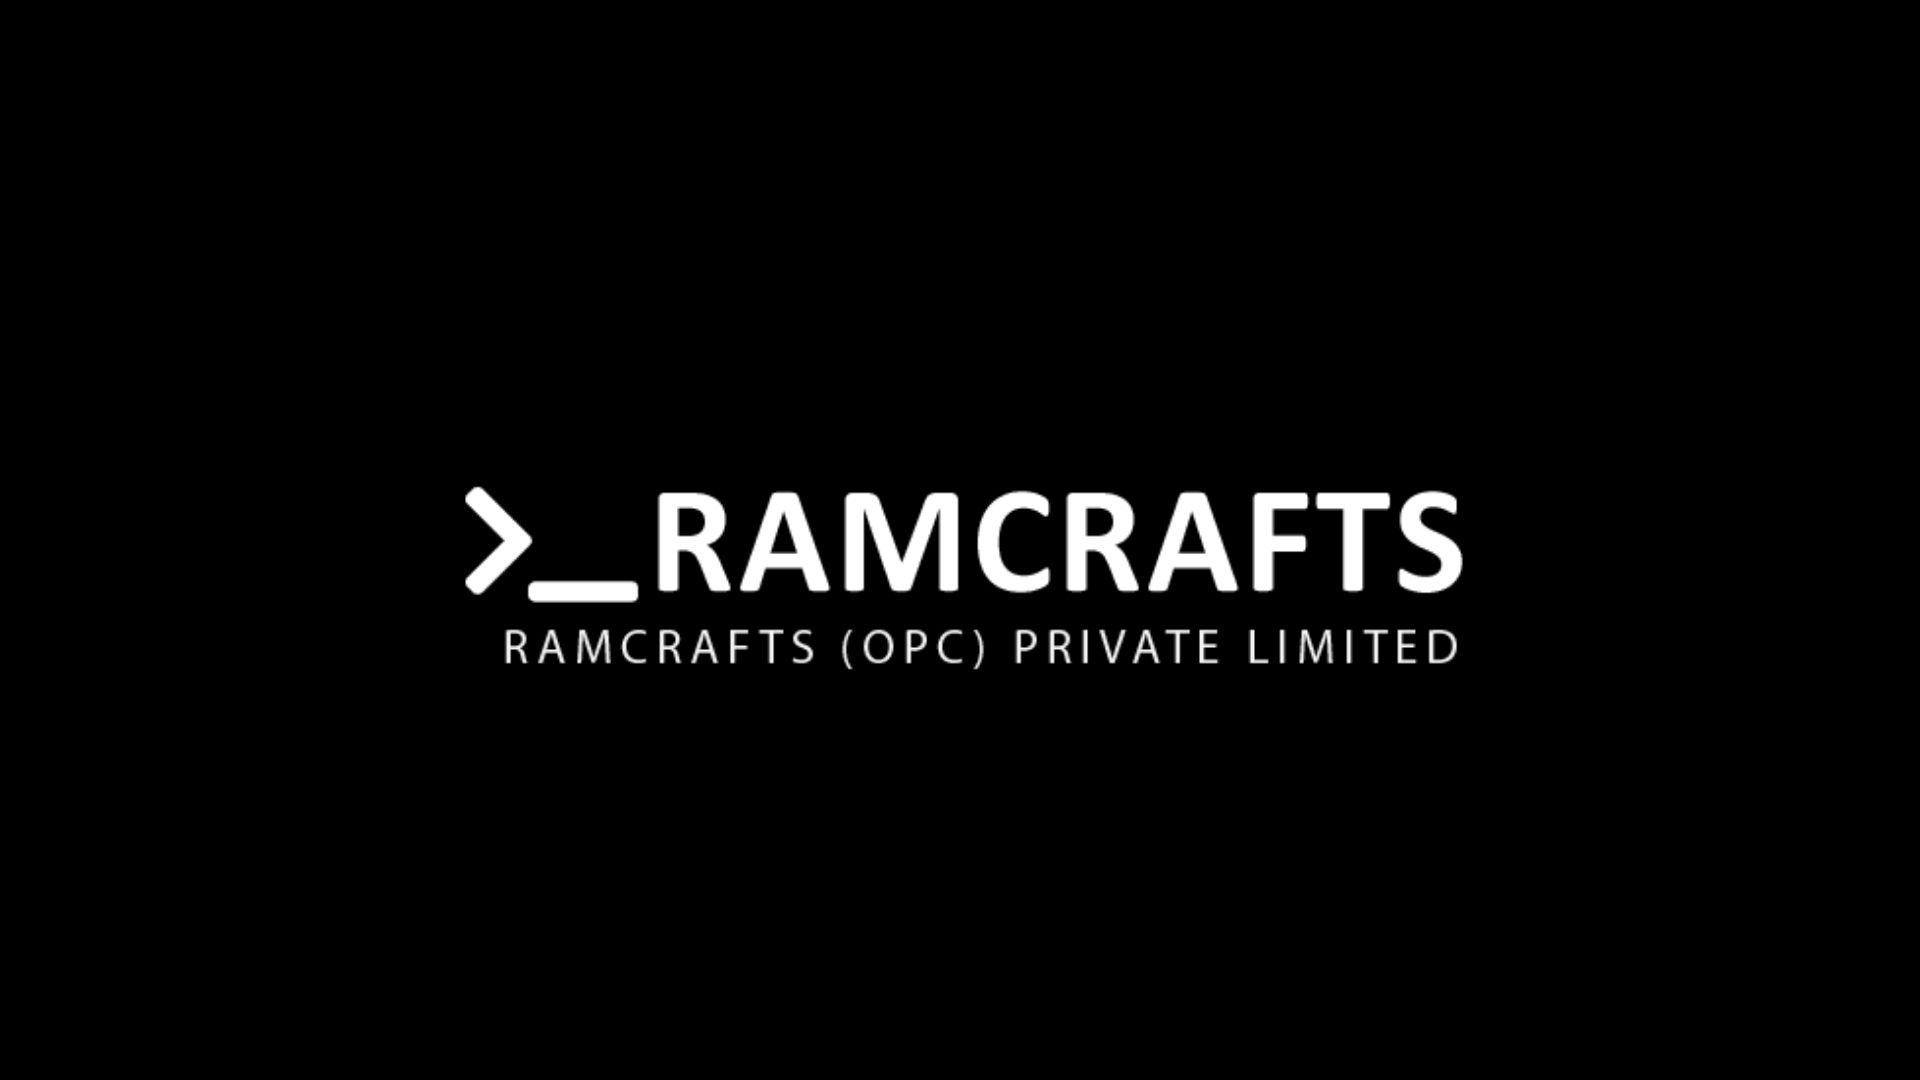 RAMCRAFTS (OPC) PRIVATE LIMITED